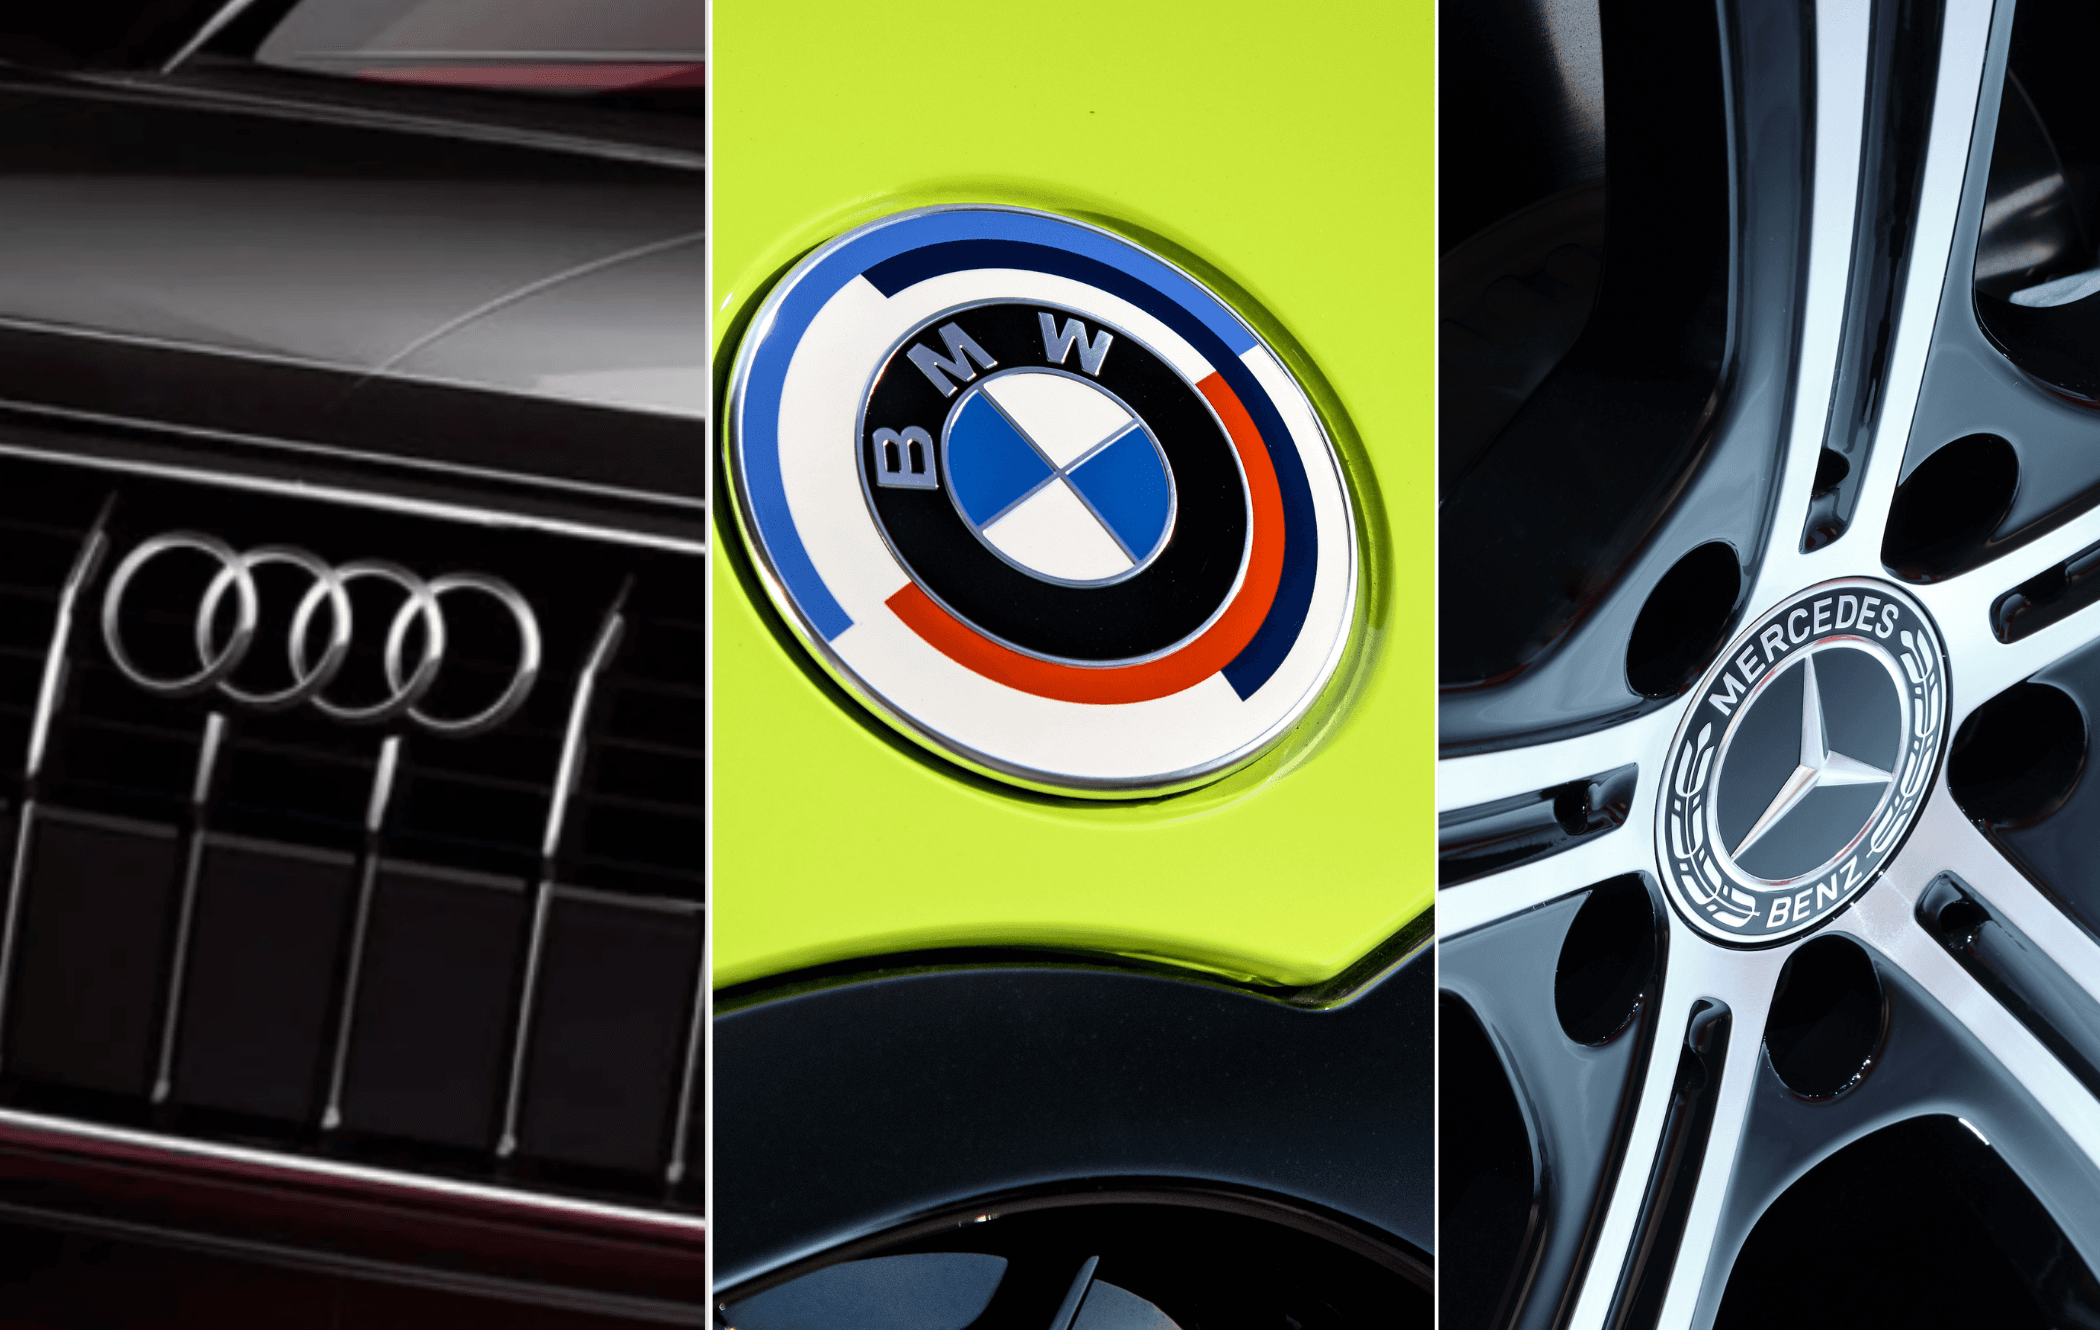 A comparison of the Audi, BMW, and Mercedes logos